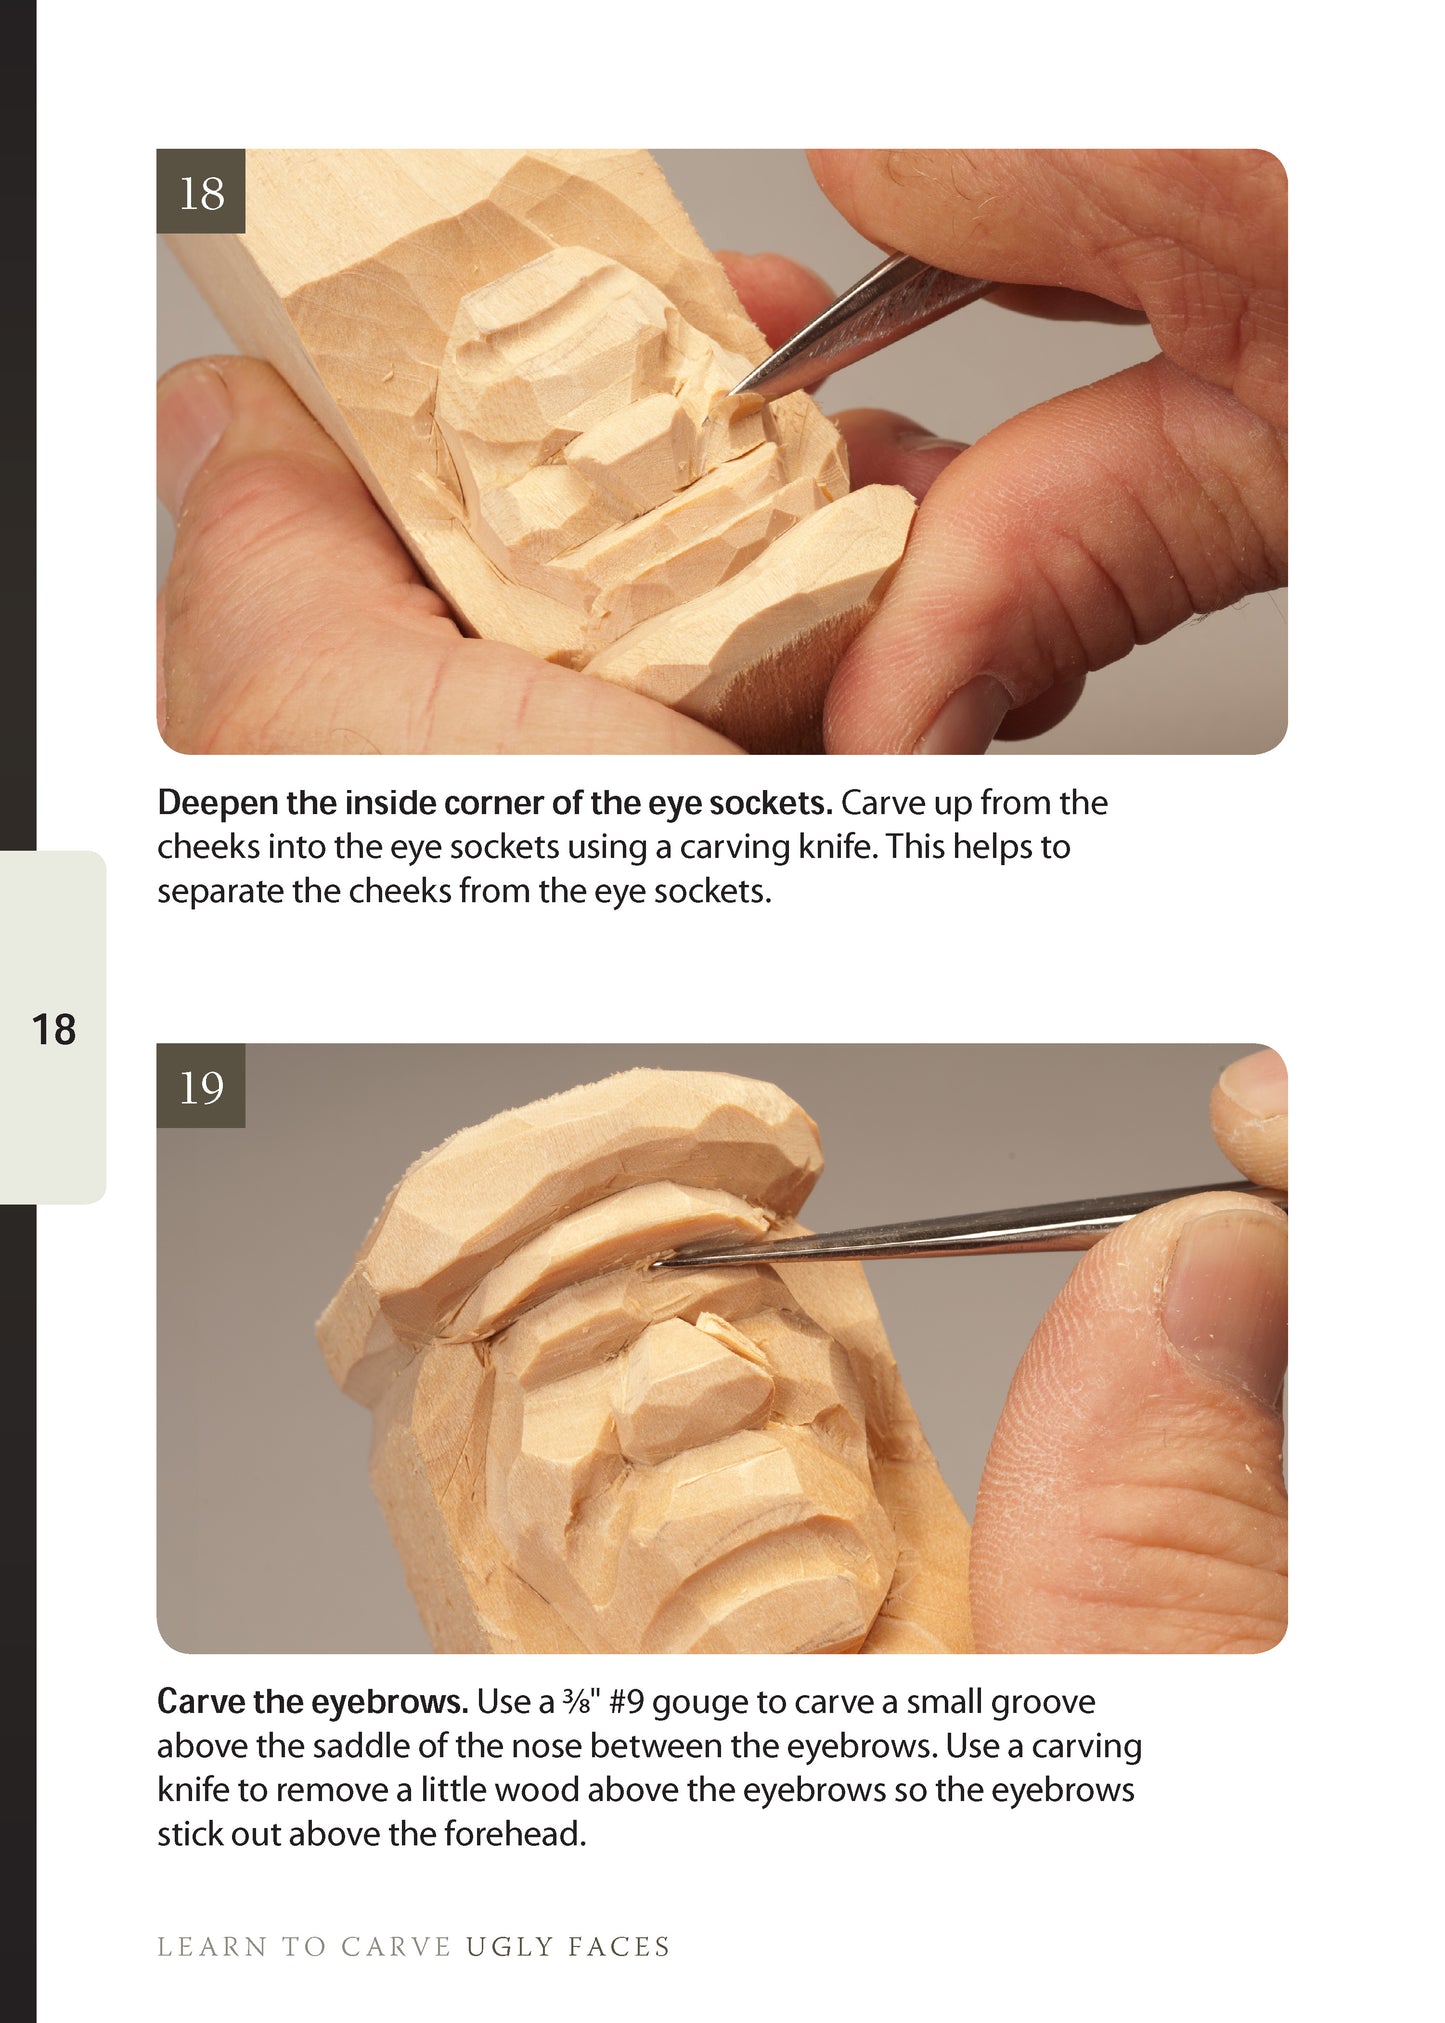 Learn to Carve Ugly Faces (Booklet)